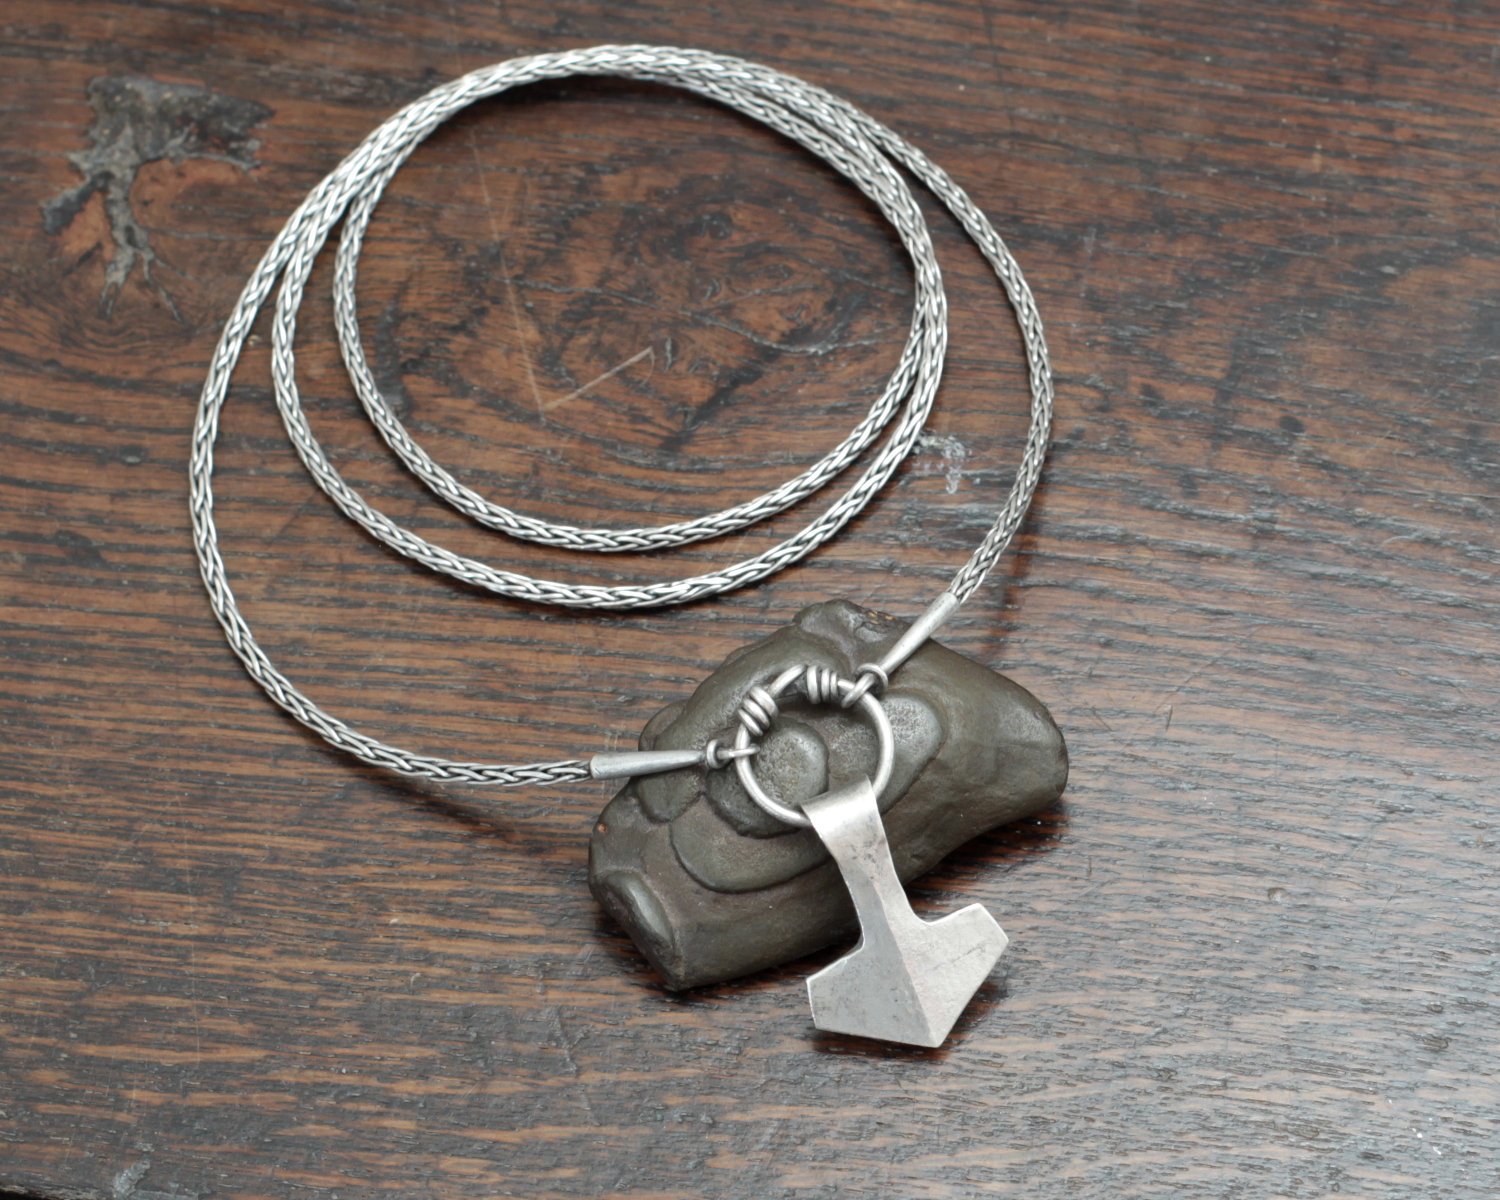 Forged silver mJolnir on a viking knit chain